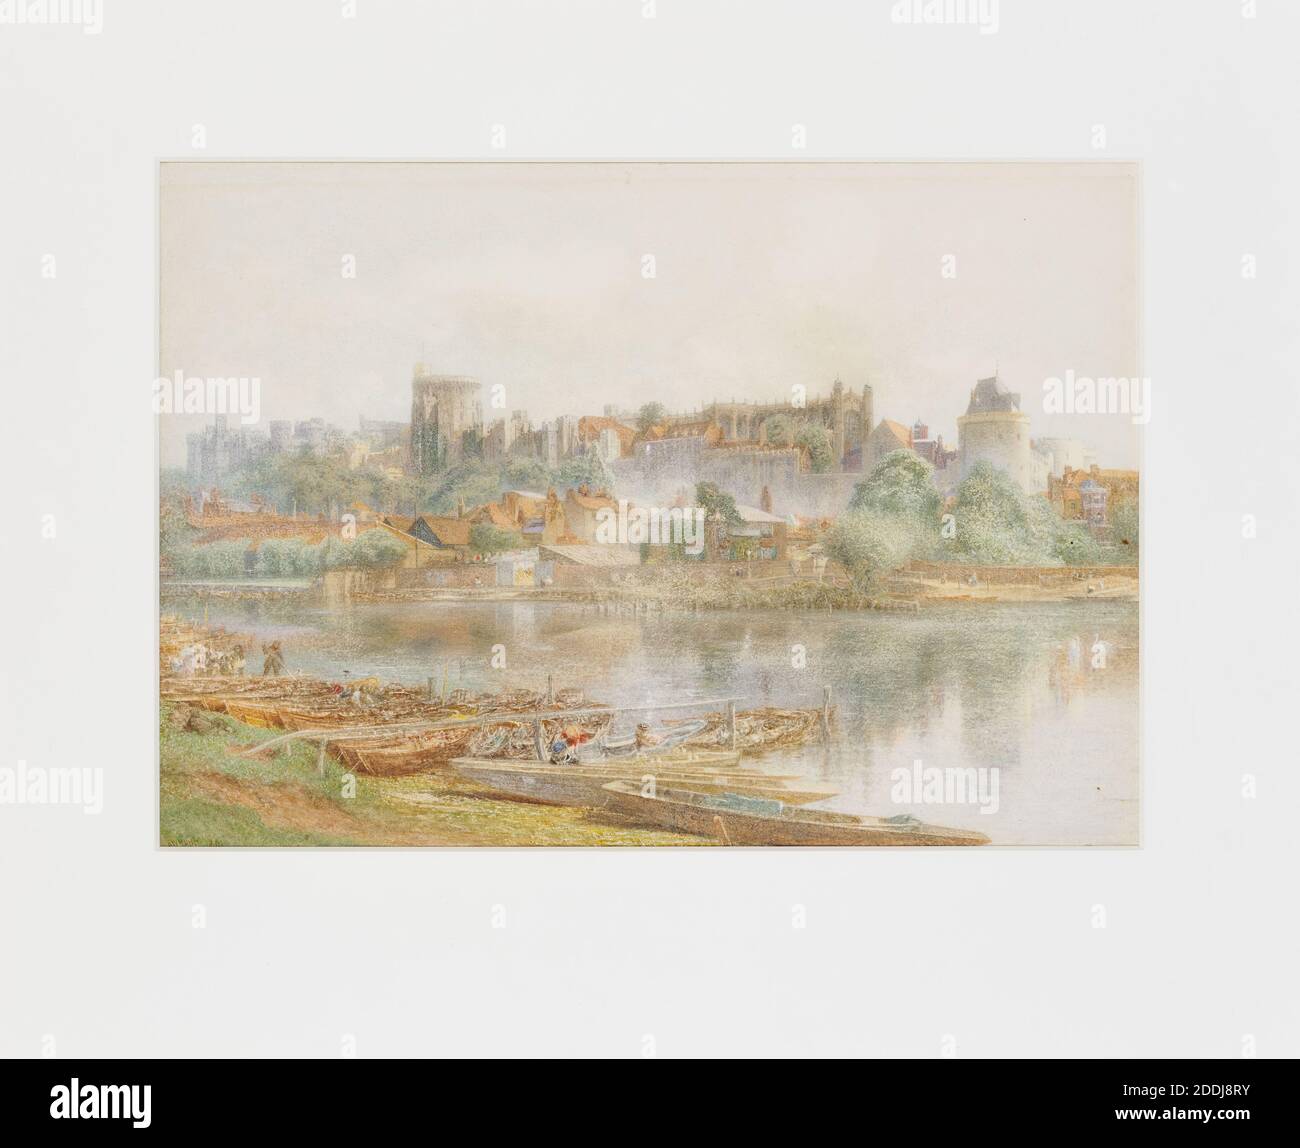 Windsor And Its Castle From Across The Thames, 1891 Alfred William Hunt (d,1896), Boat, Landscape, 19th Century, Watercolour, Castle, Frame, Sea, Royal, River, Thames, Works on Paper Stock Photo